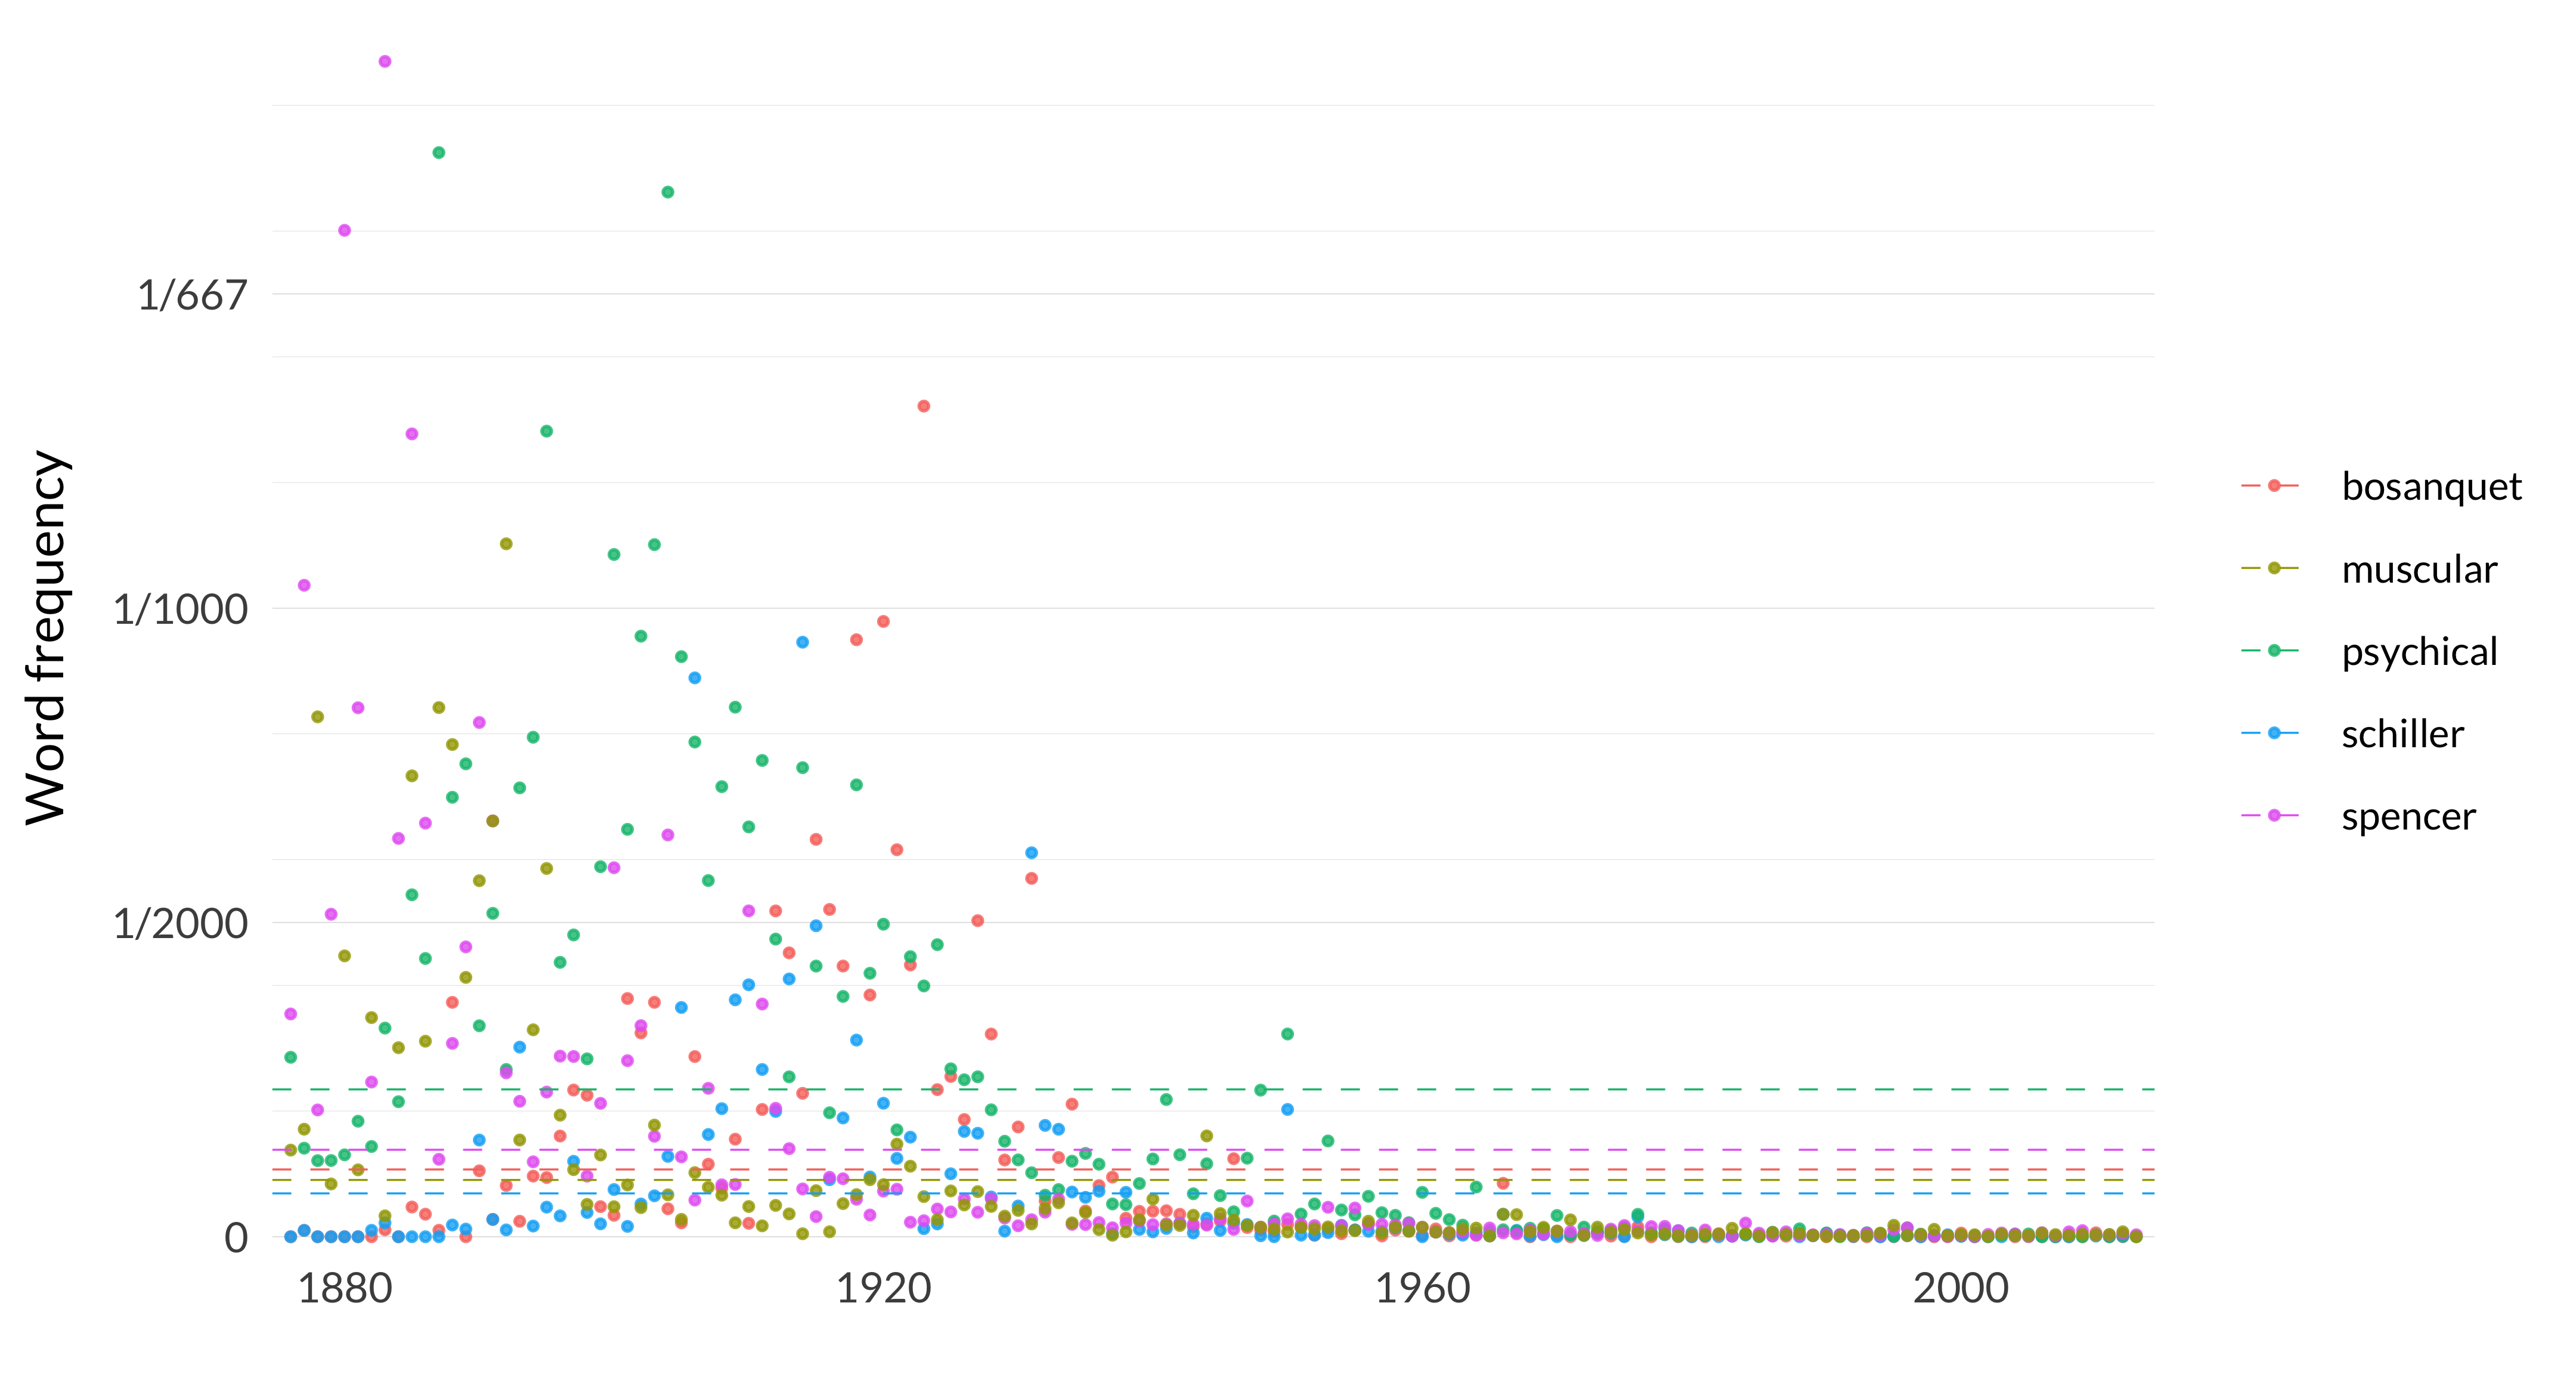 A scatterplot showing the frequency of the words bosanquet, schiller, psychical, spencer, muscular. The word bosanquet appears, on average across the years, 107 times per million words, and in the median year, it appears 11 times per million words. Its most frequent occurrence is in 1923 when it appears 1322 times per million words, and its least frequent occurrence is in 1876 when it appears 0 times per million words. The word schiller appears, on average across the years, 69 times per million words, and in the median year, it appears 9 times per million words. Its most frequent occurrence is in 1914 when it appears 946 times per million words, and its least frequent occurrence is in 1876 when it appears 0 times per million words. The word psychical appears, on average across the years, 234 times per million words, and in the median year, it appears 77 times per million words. Its most frequent occurrence is in 1887 when it appears 1725 times per million words, and its least frequent occurrence is in 1991 when it appears 0 times per million words. The word spencer appears, on average across the years, 138 times per million words, and in the median year, it appears 20 times per million words. Its most frequent occurrence is in 1883 when it appears 1870 times per million words, and its least frequent occurrence is in 1983 when it appears 1 times per million words. The word muscular appears, on average across the years, 90 times per million words, and in the median year, it appears 18 times per million words. Its most frequent occurrence is in 1892 when it appears 1102 times per million words, and its least frequent occurrence is in 2013 when it appears 0 times per million words. 